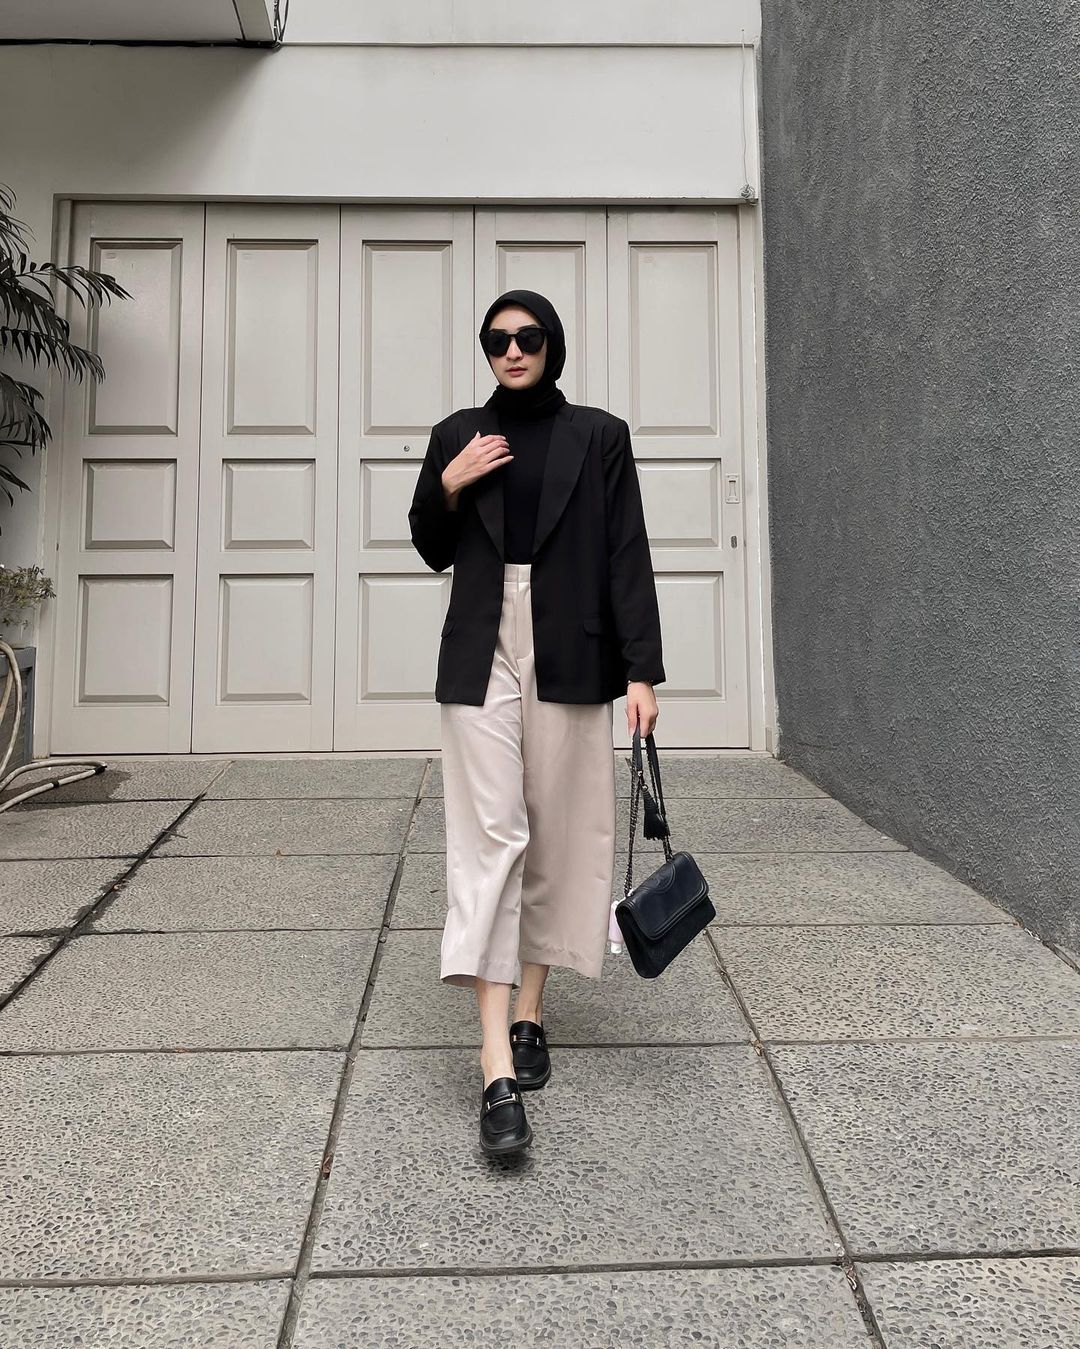 How to Wear Leggings as Pants After 50 by Budget Fashionista